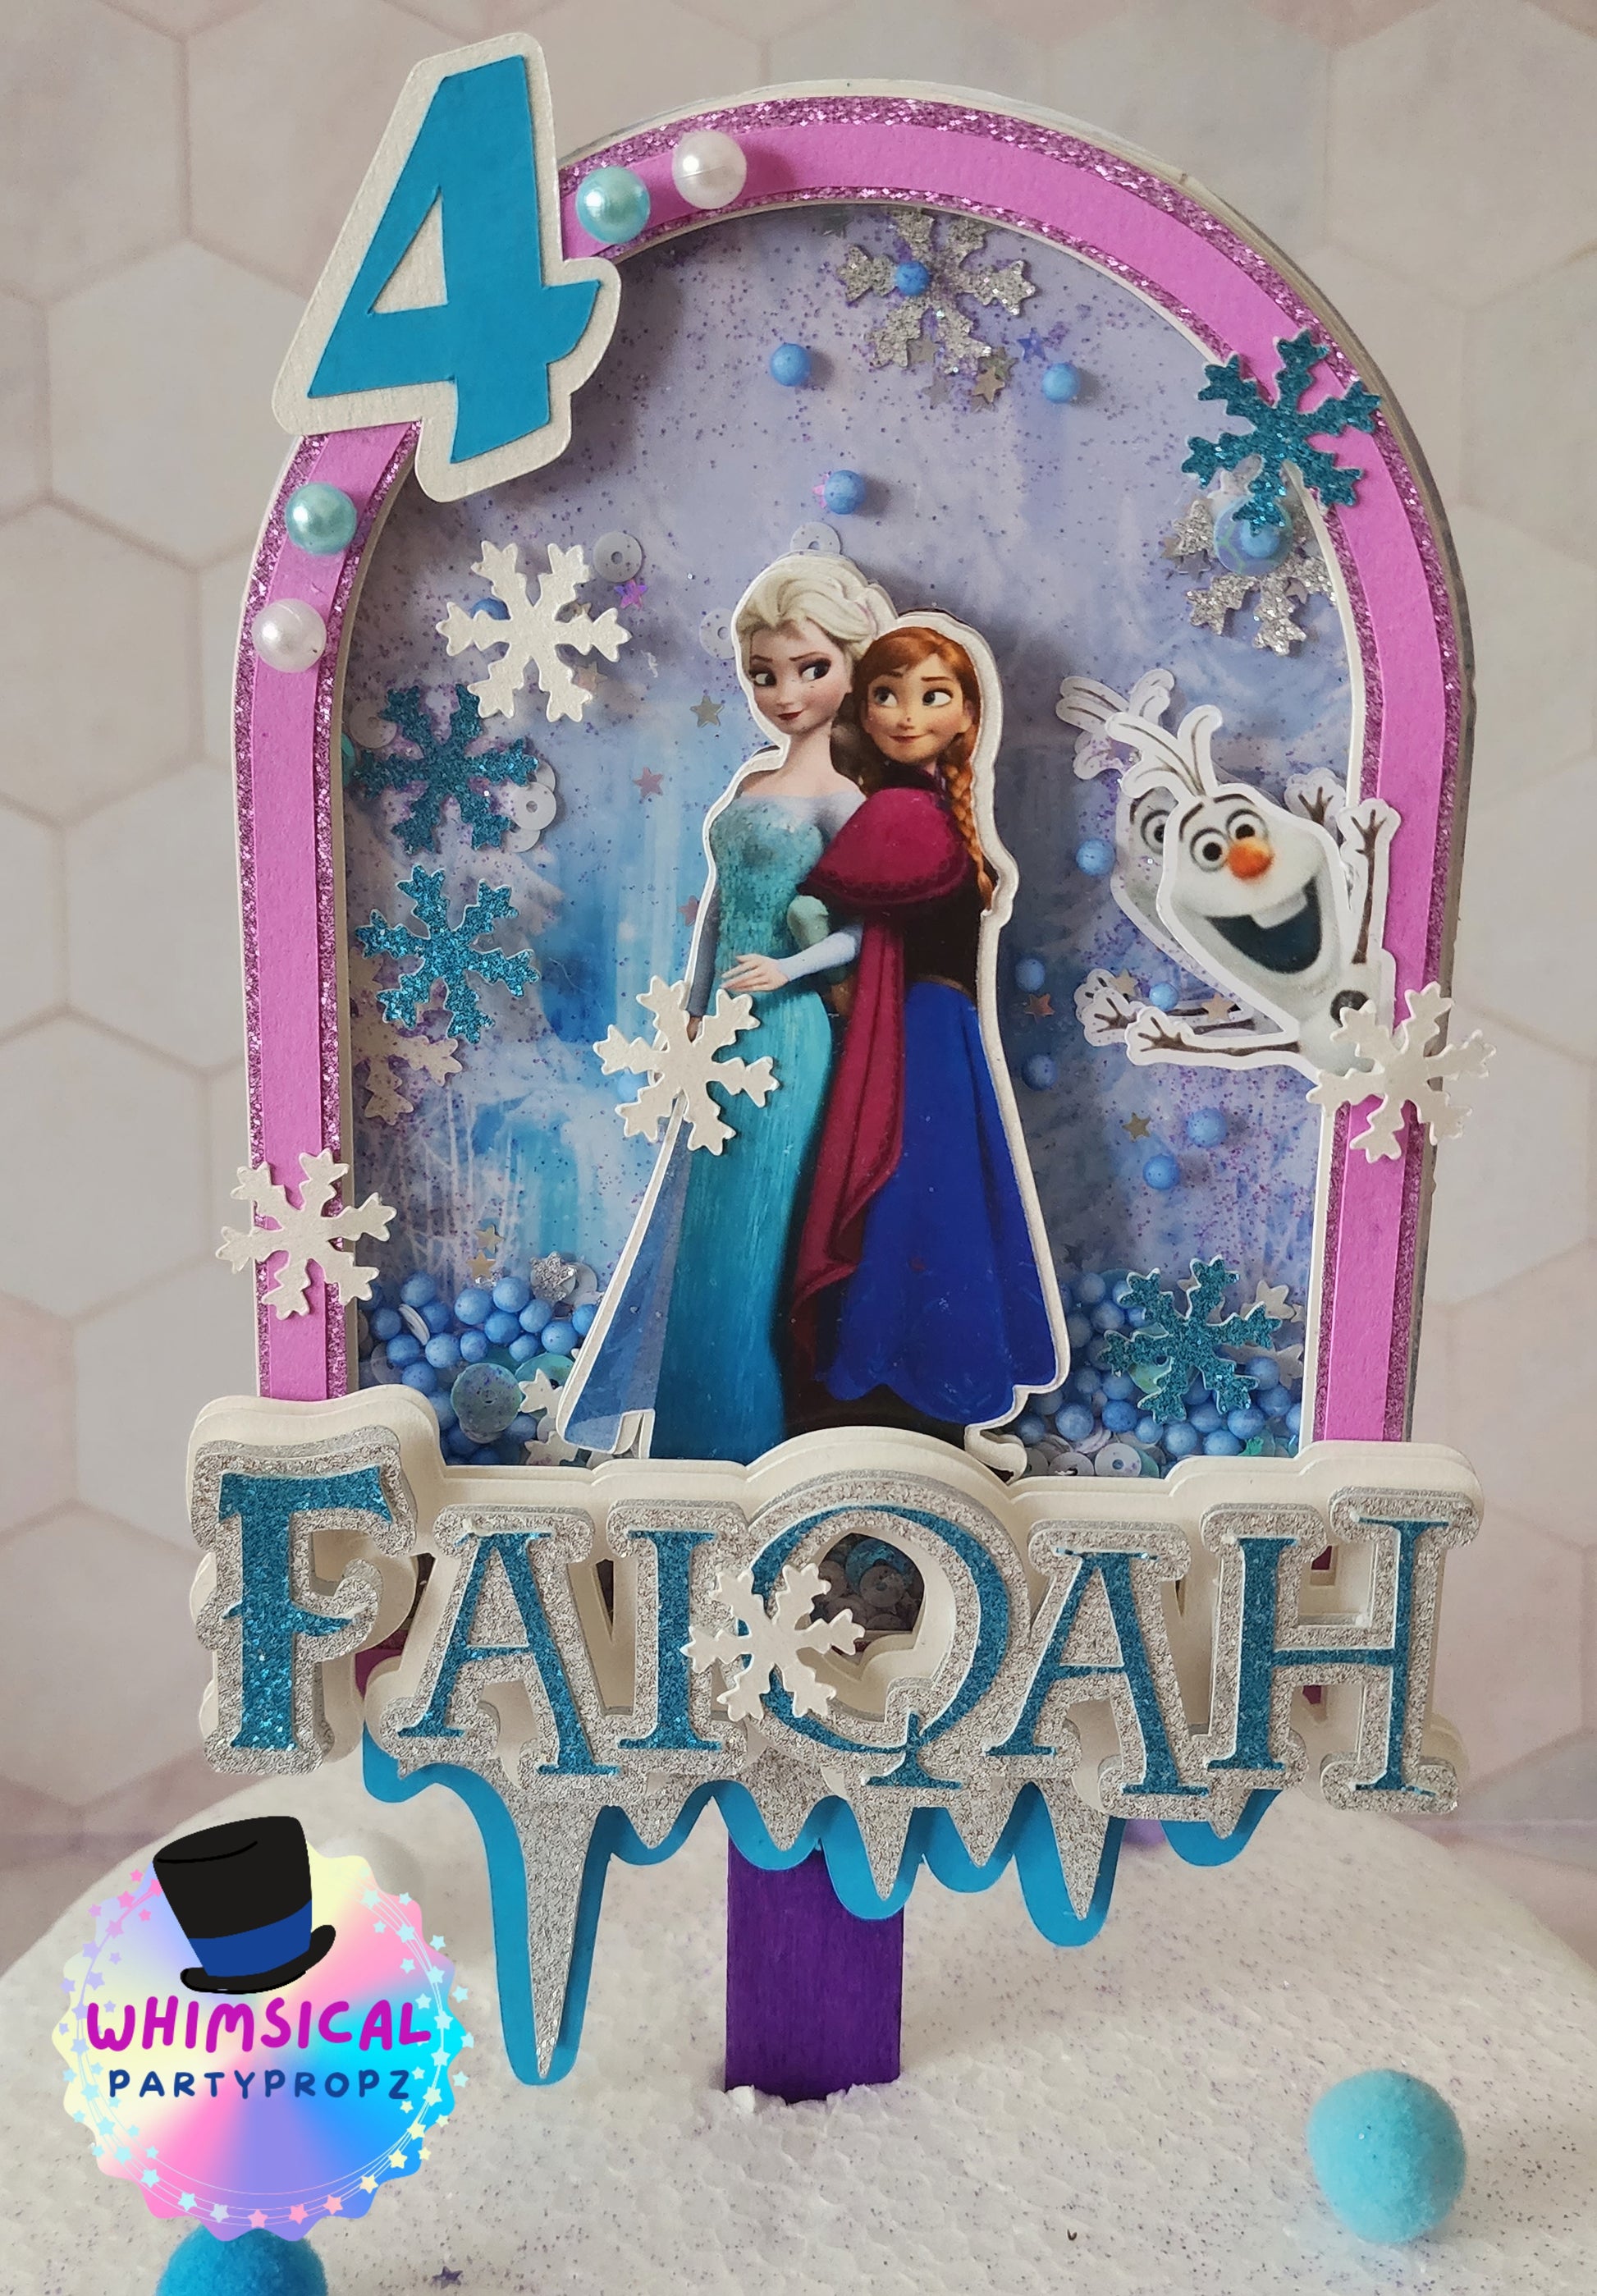 Customised cake topper - Princess Anna, Frozen Theme – Whimsical_PartyPropz